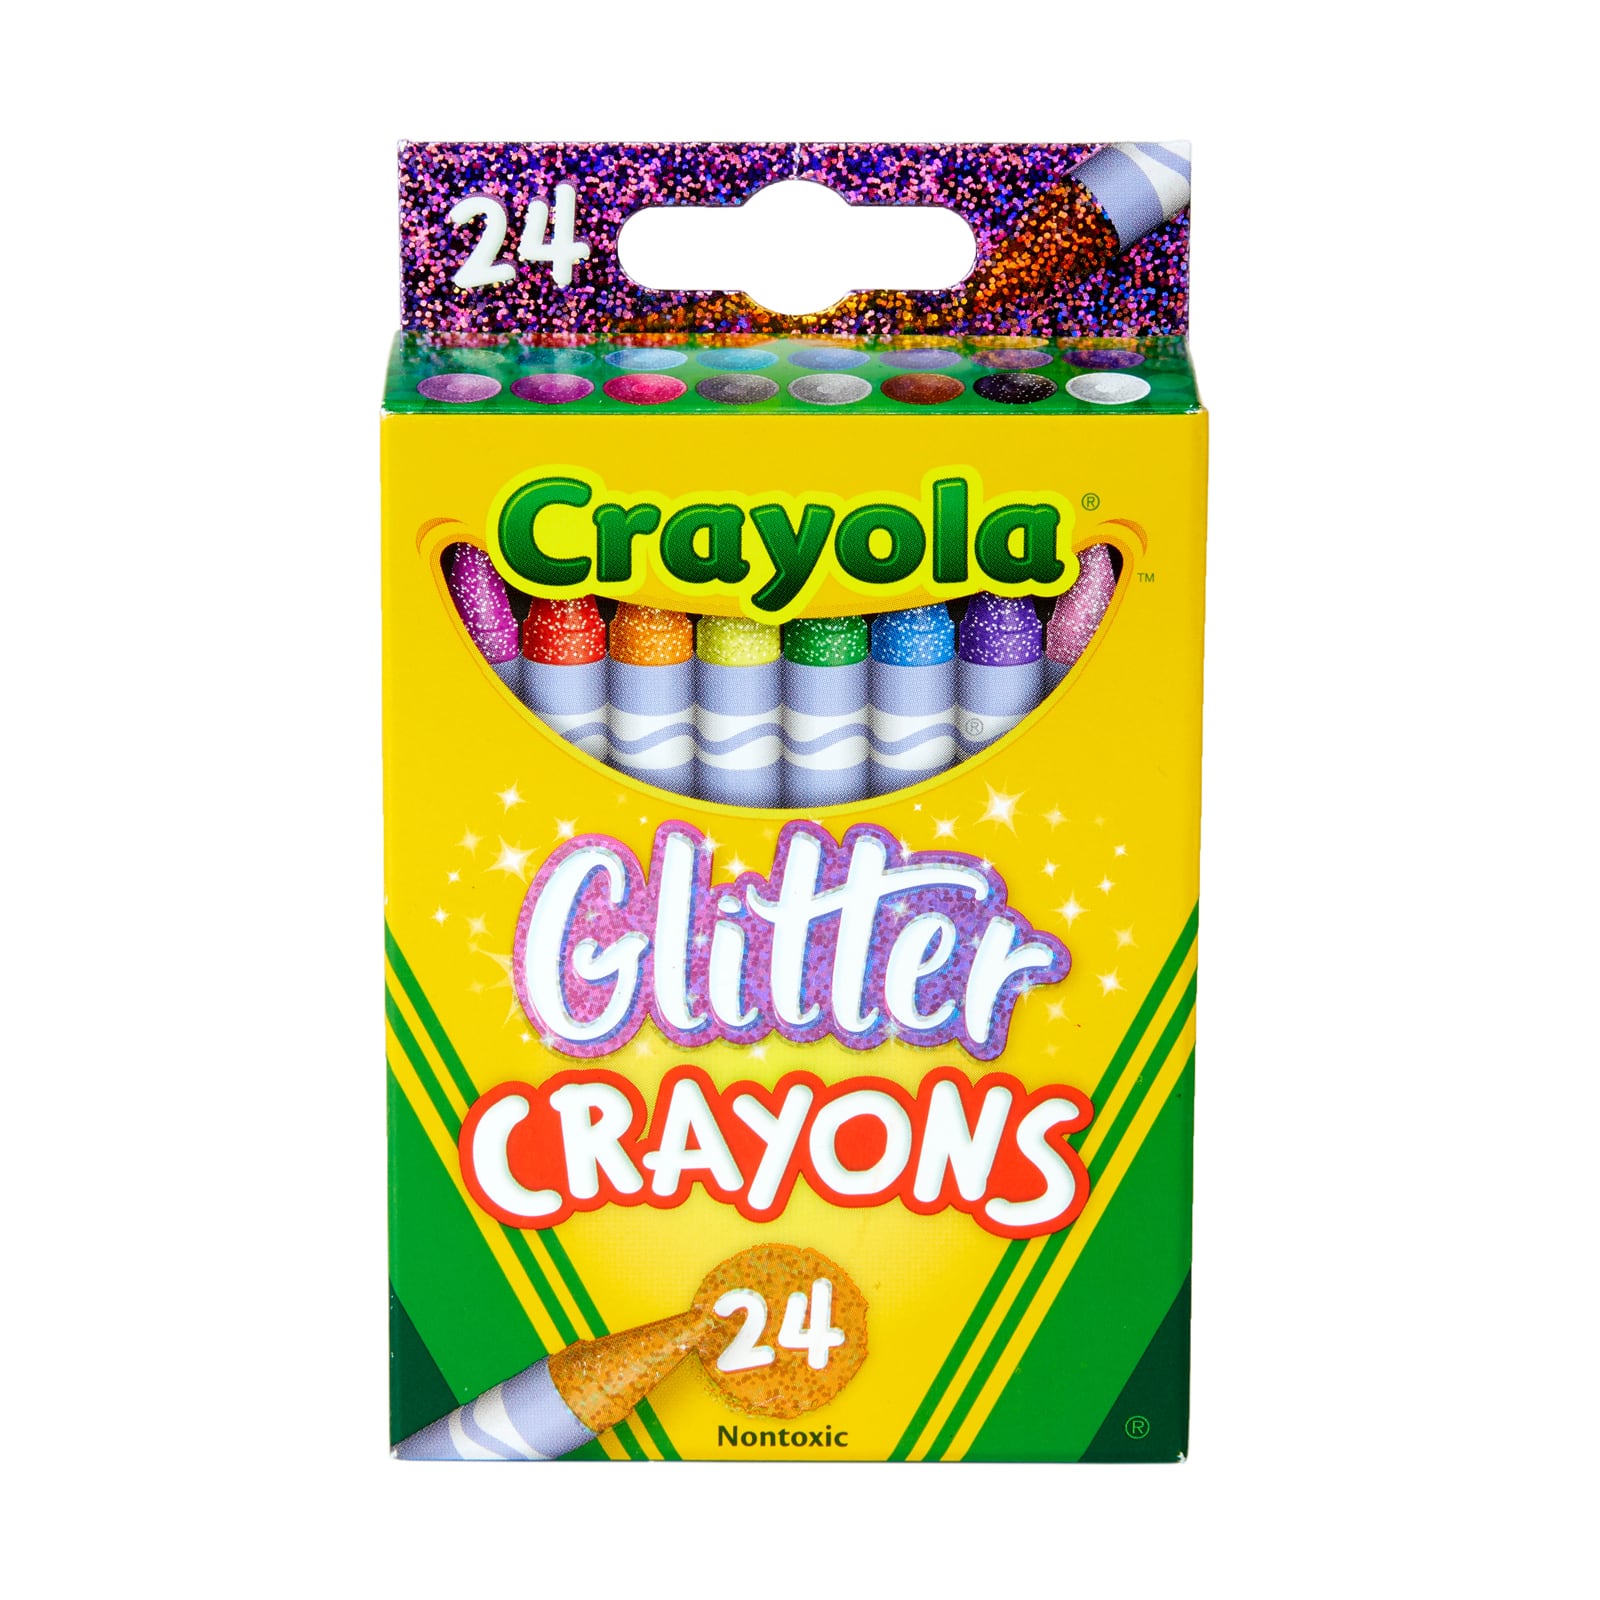 Find the Crayola® Glitter Crayons, 24ct. at Michaels